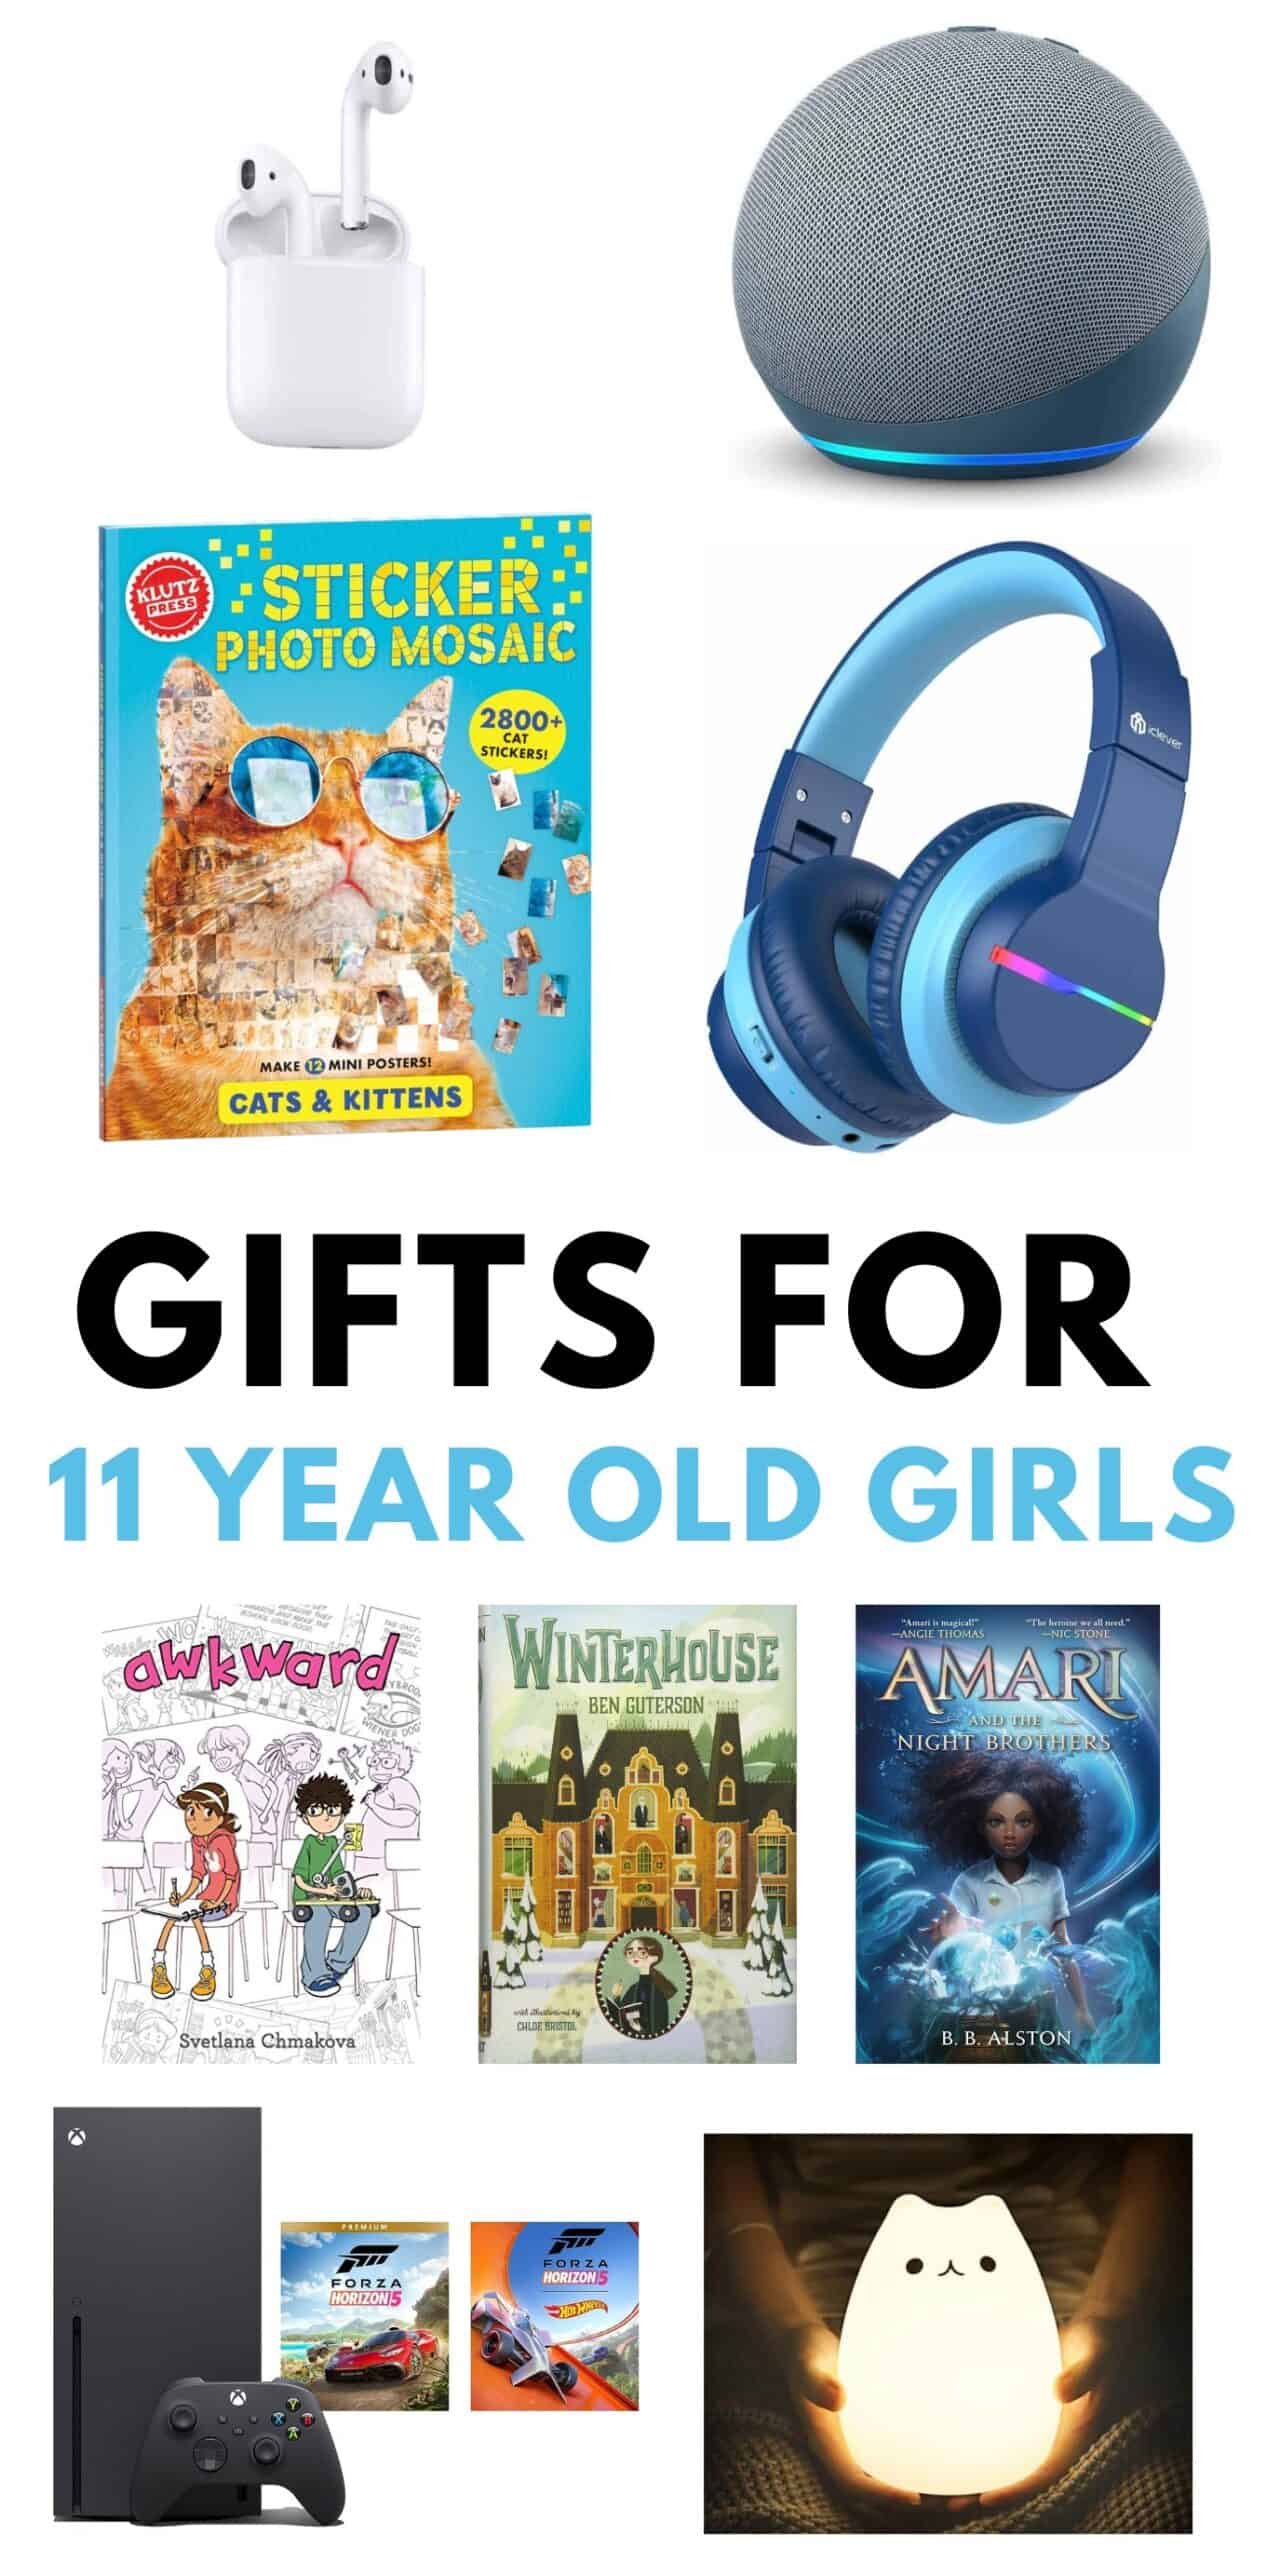 Best Toys for 11 Year Old Girls - FUN TOYS FOR KIDS